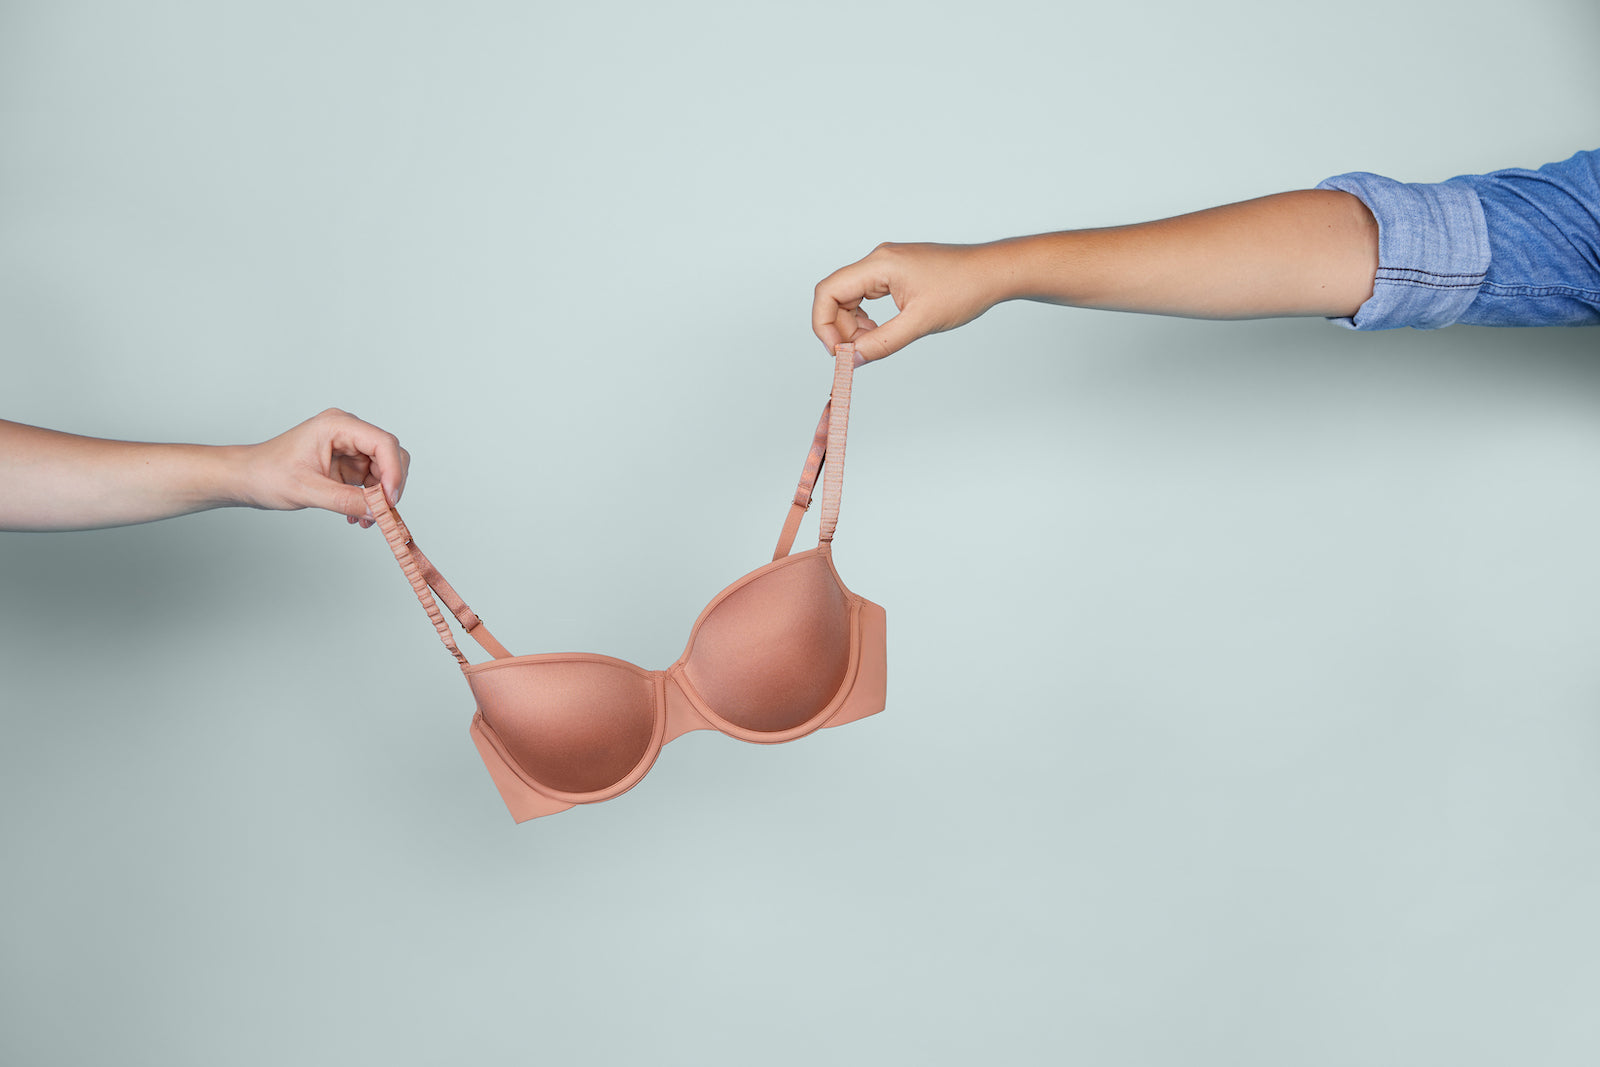 Can You Return a Bra? How To Deal With Unwanted Gifts